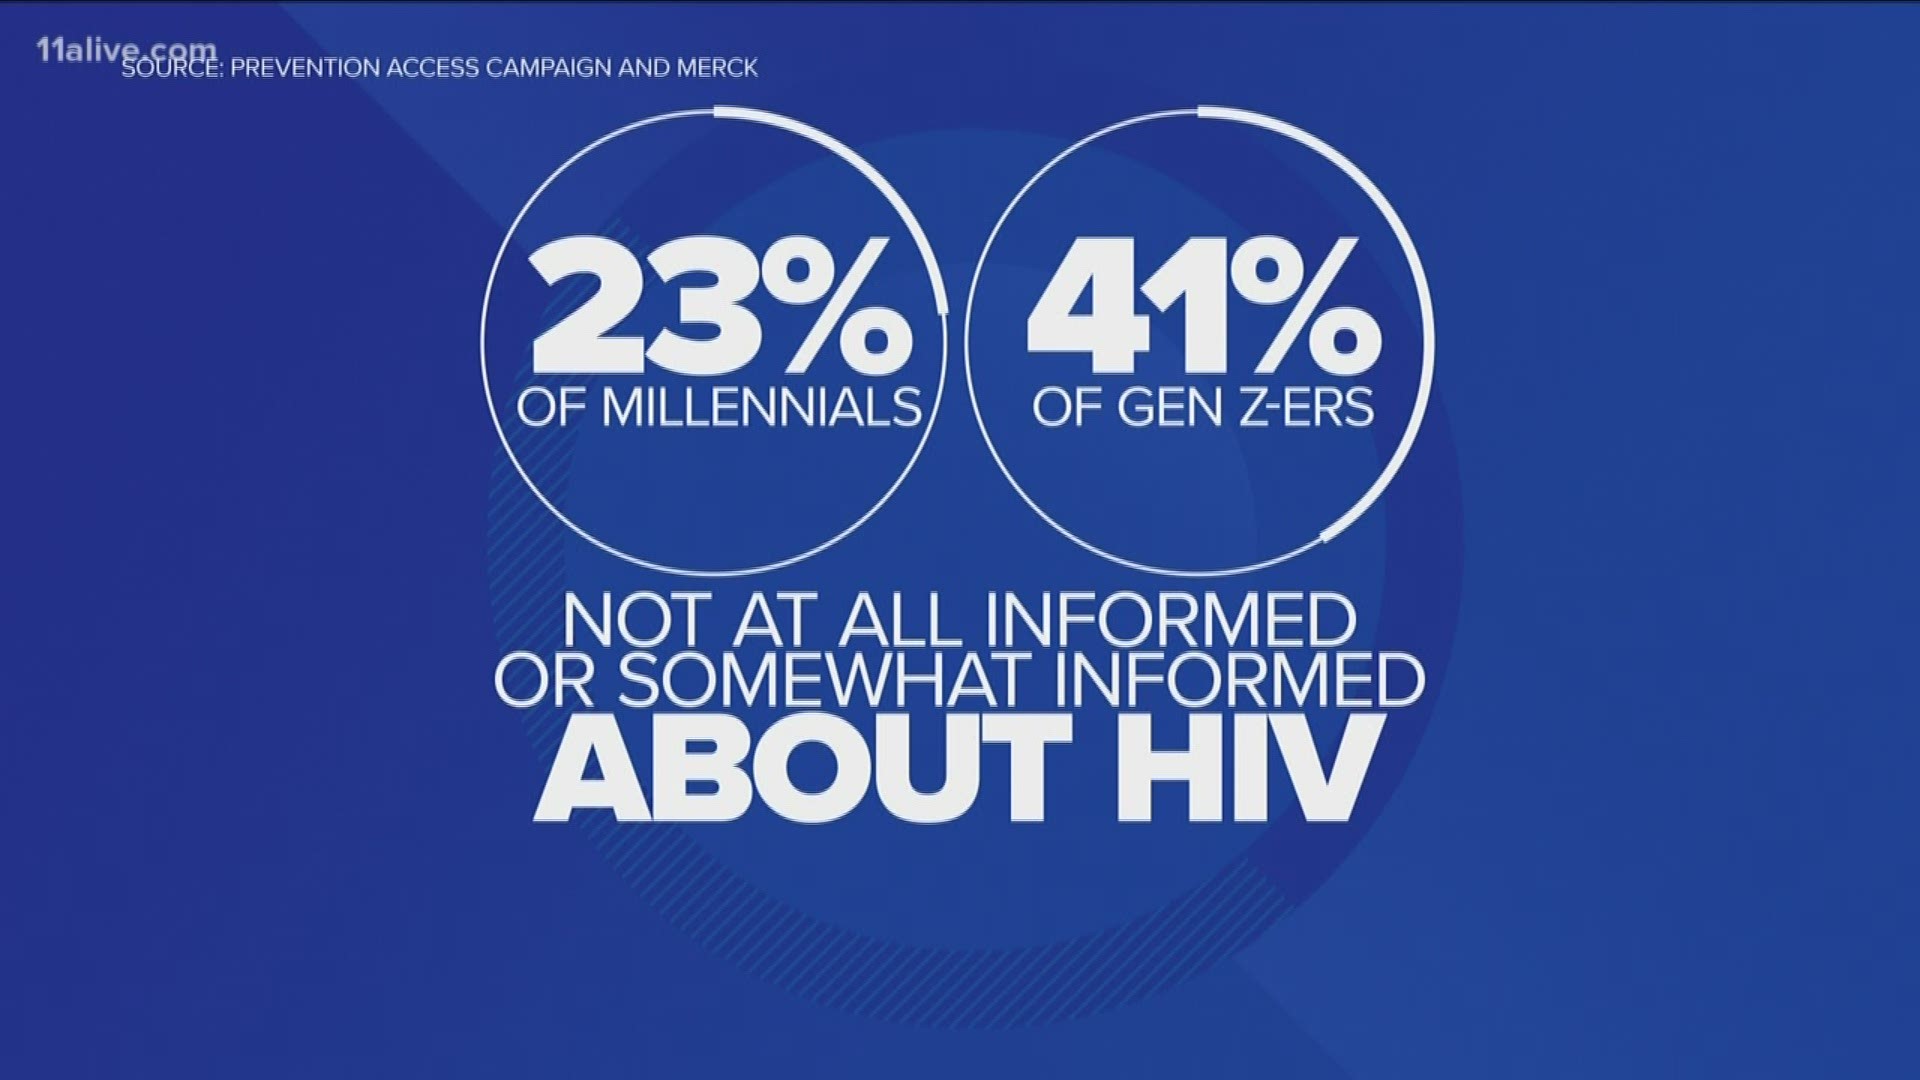 A recent survey found 23 percent of Millennials and 41 percent of Gen Zers say they are either not at all informed, or only somewhat informed about HIV.